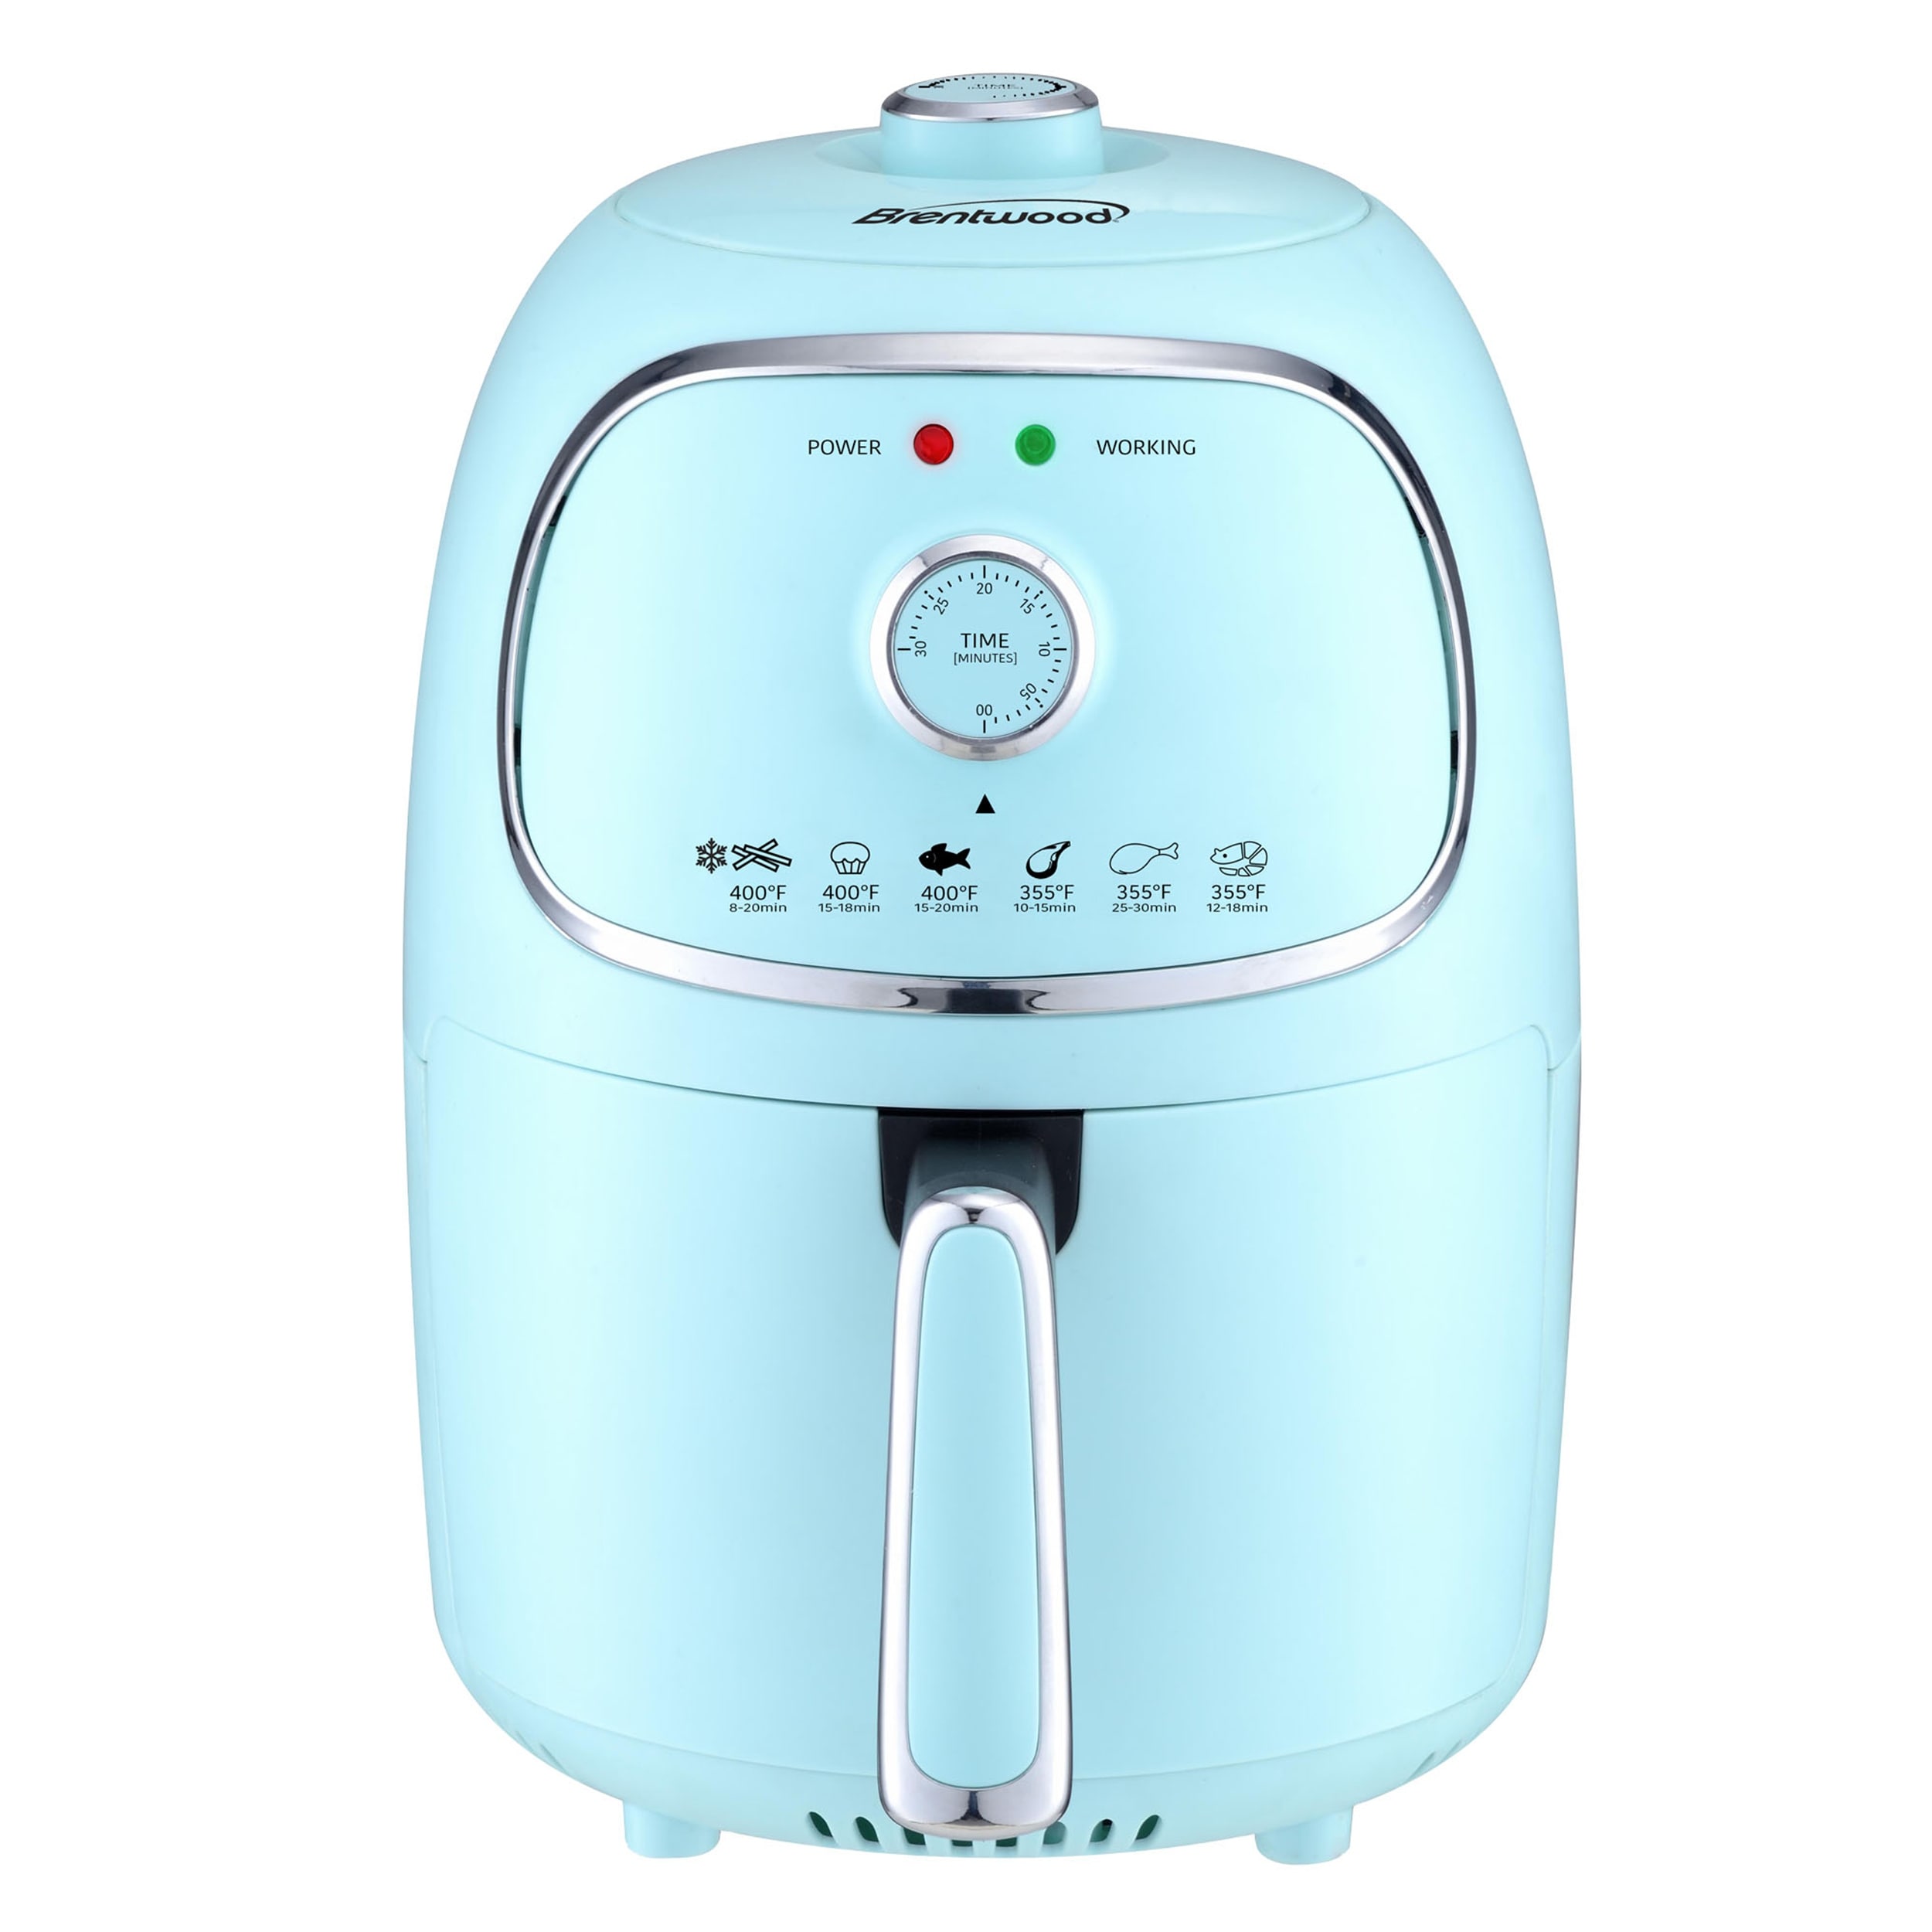 https://ak1.ostkcdn.com/images/products/is/images/direct/d67f901c1fbe6b0633dfc4a769e8abf06a9d5b63/2-Quart-Compact-Electric-Air-Fryer-in-Teal.jpg